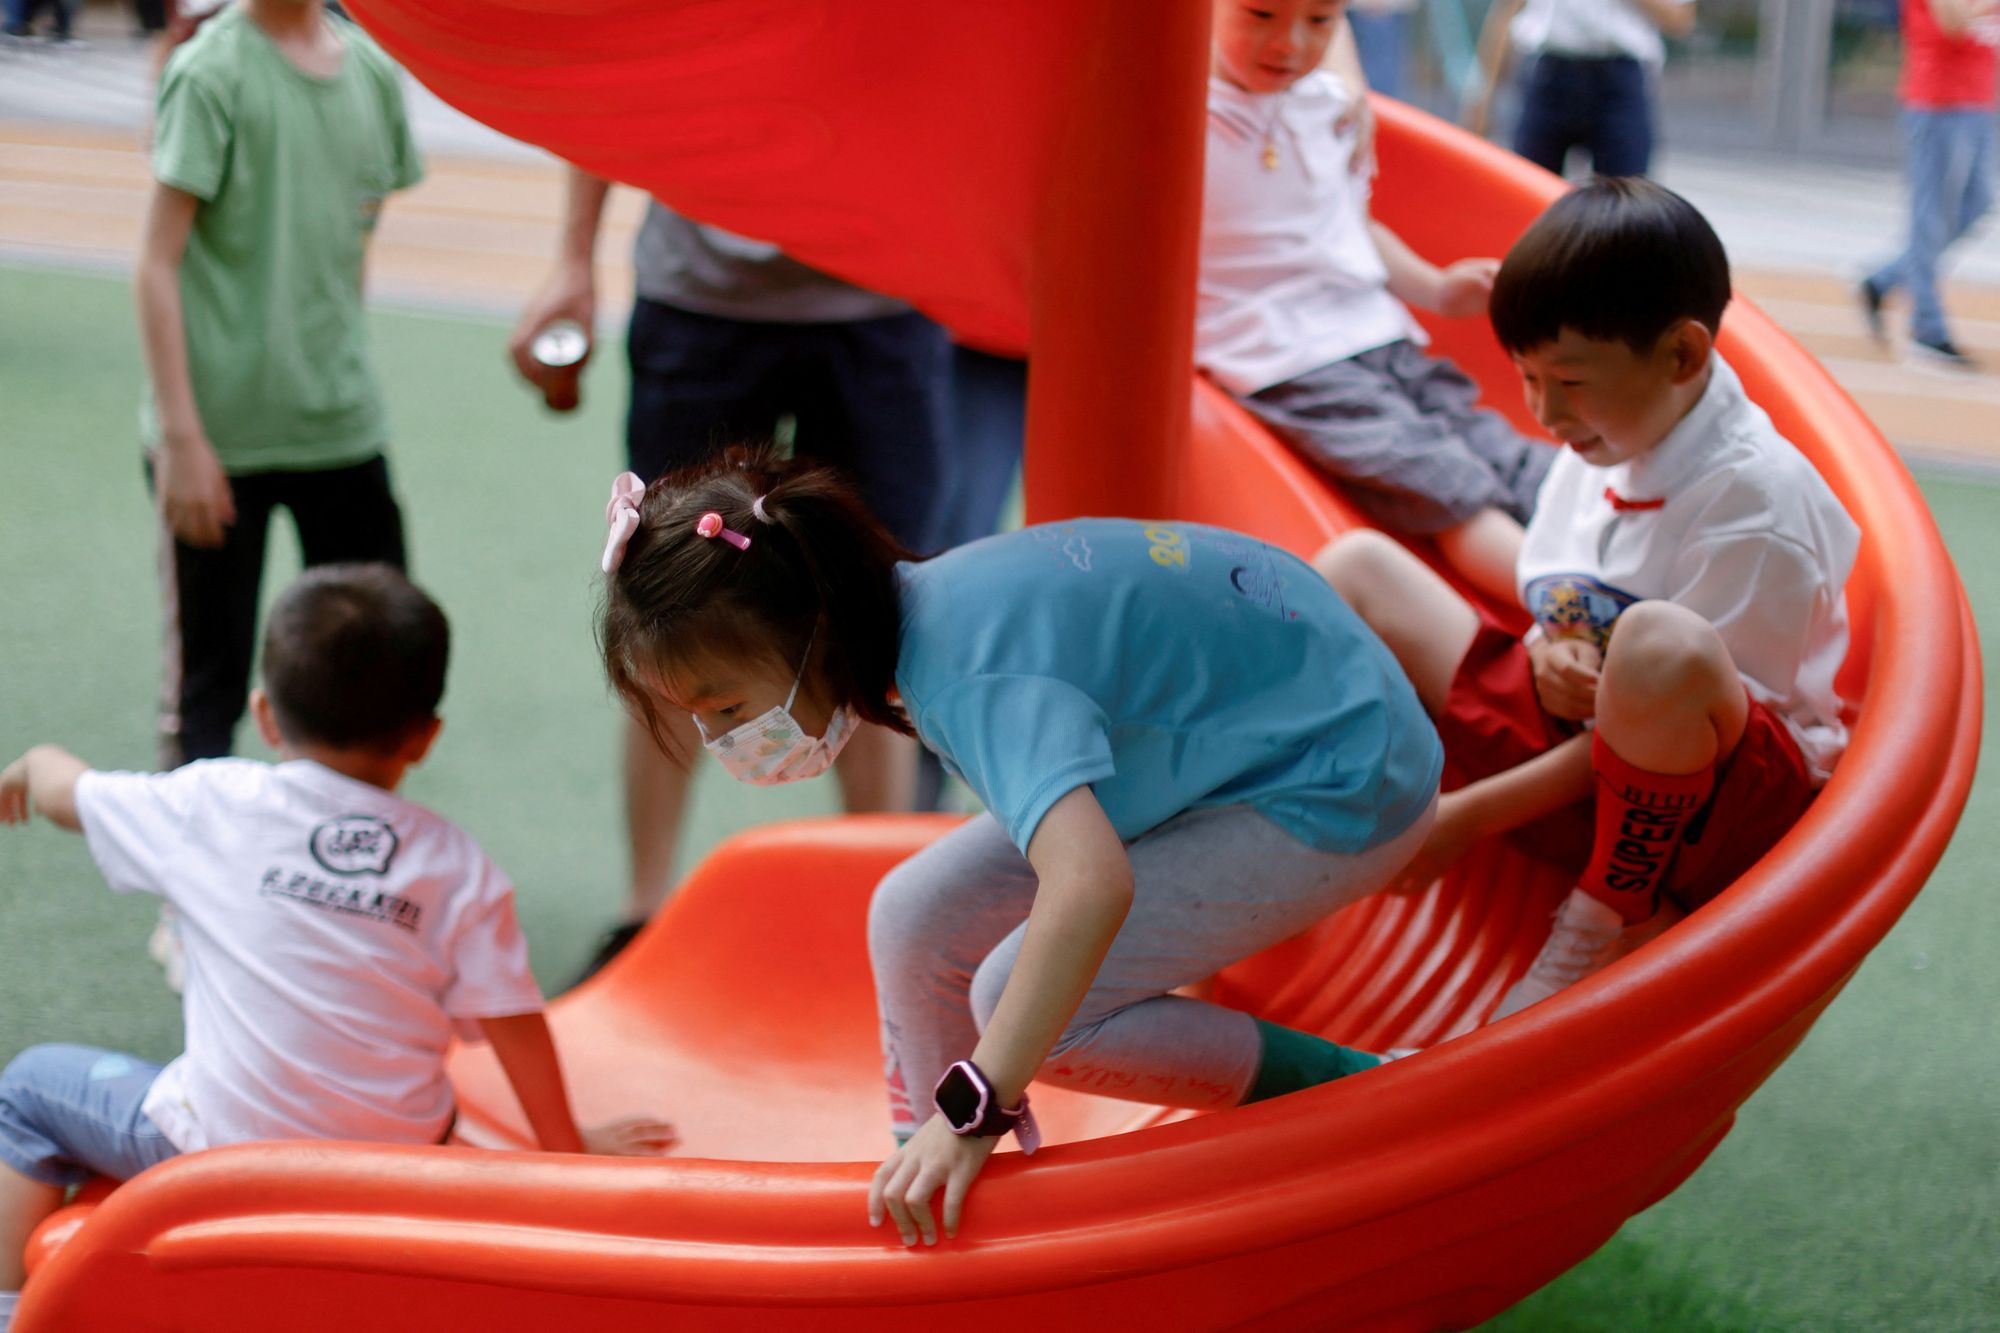 China's birth rate is low